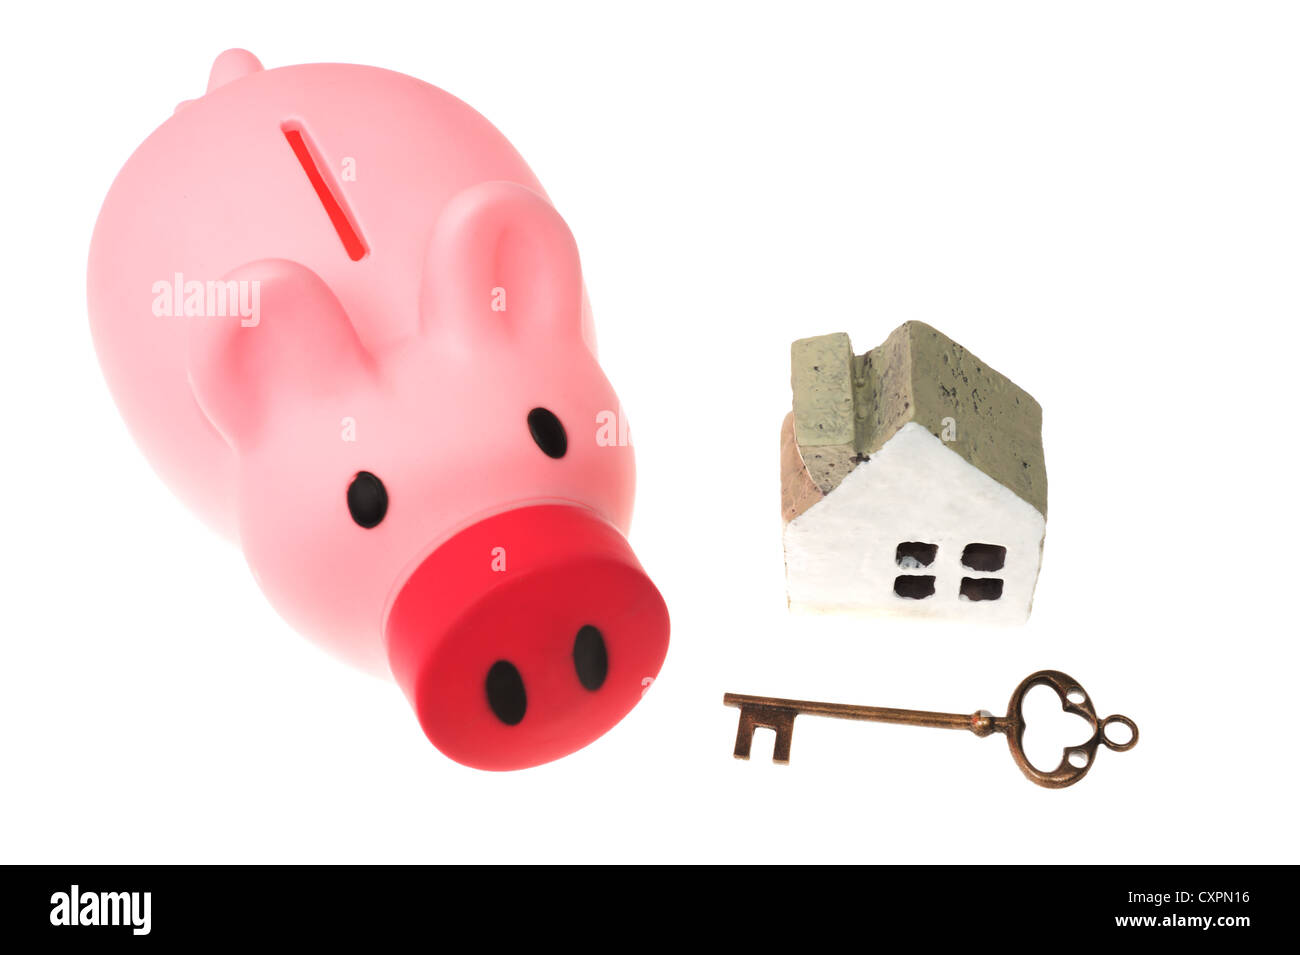 Piggy bank, key and house model isolated on white Stock Photo